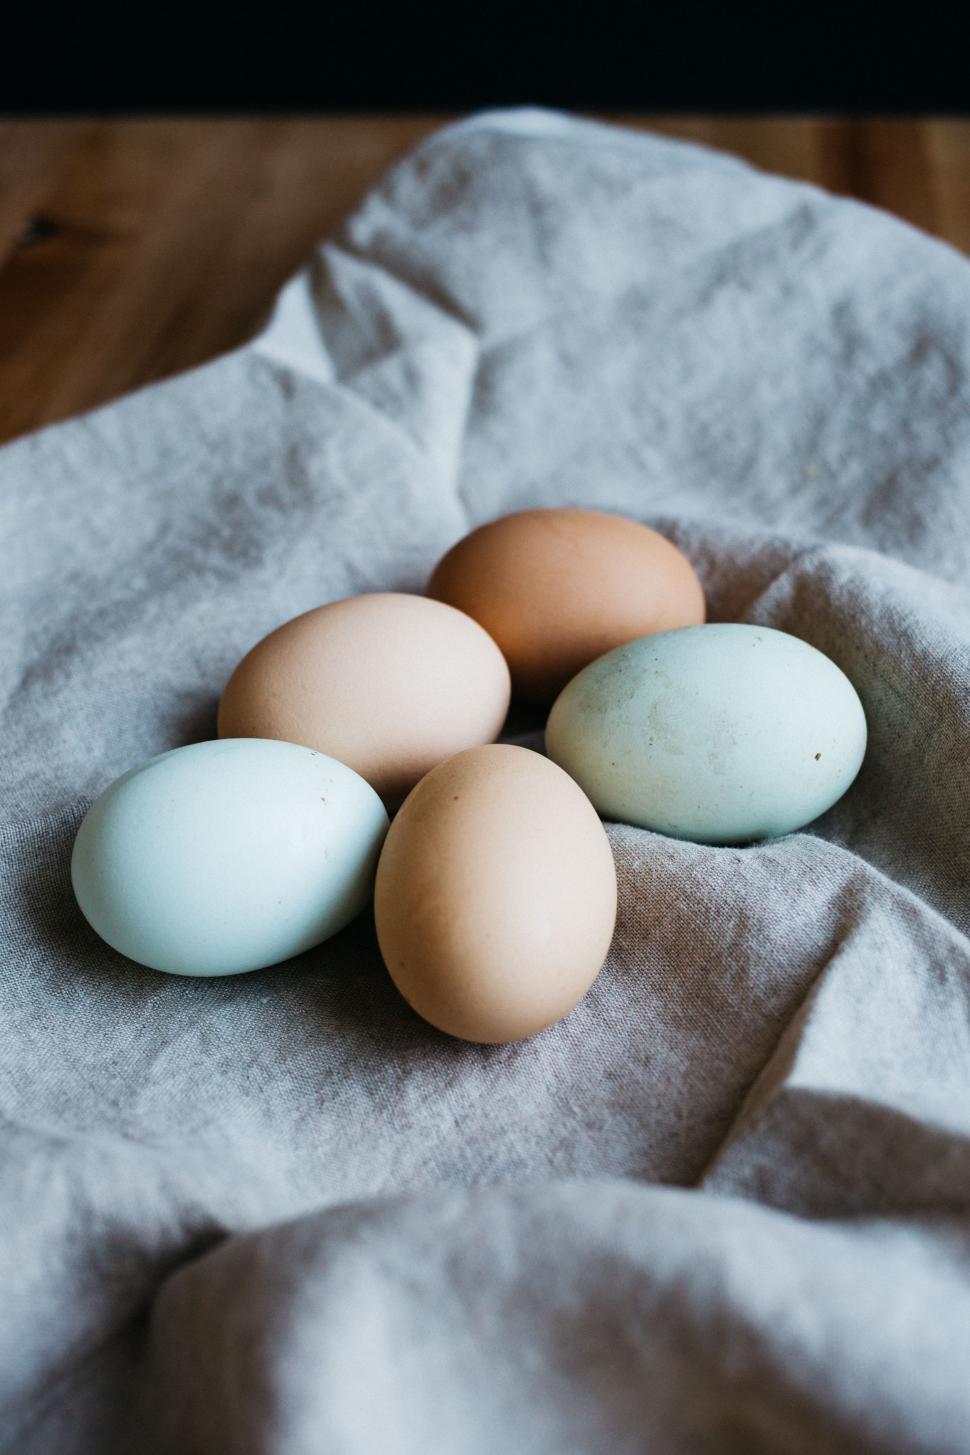 Free Image of Group of Eggs on Top of Paper 